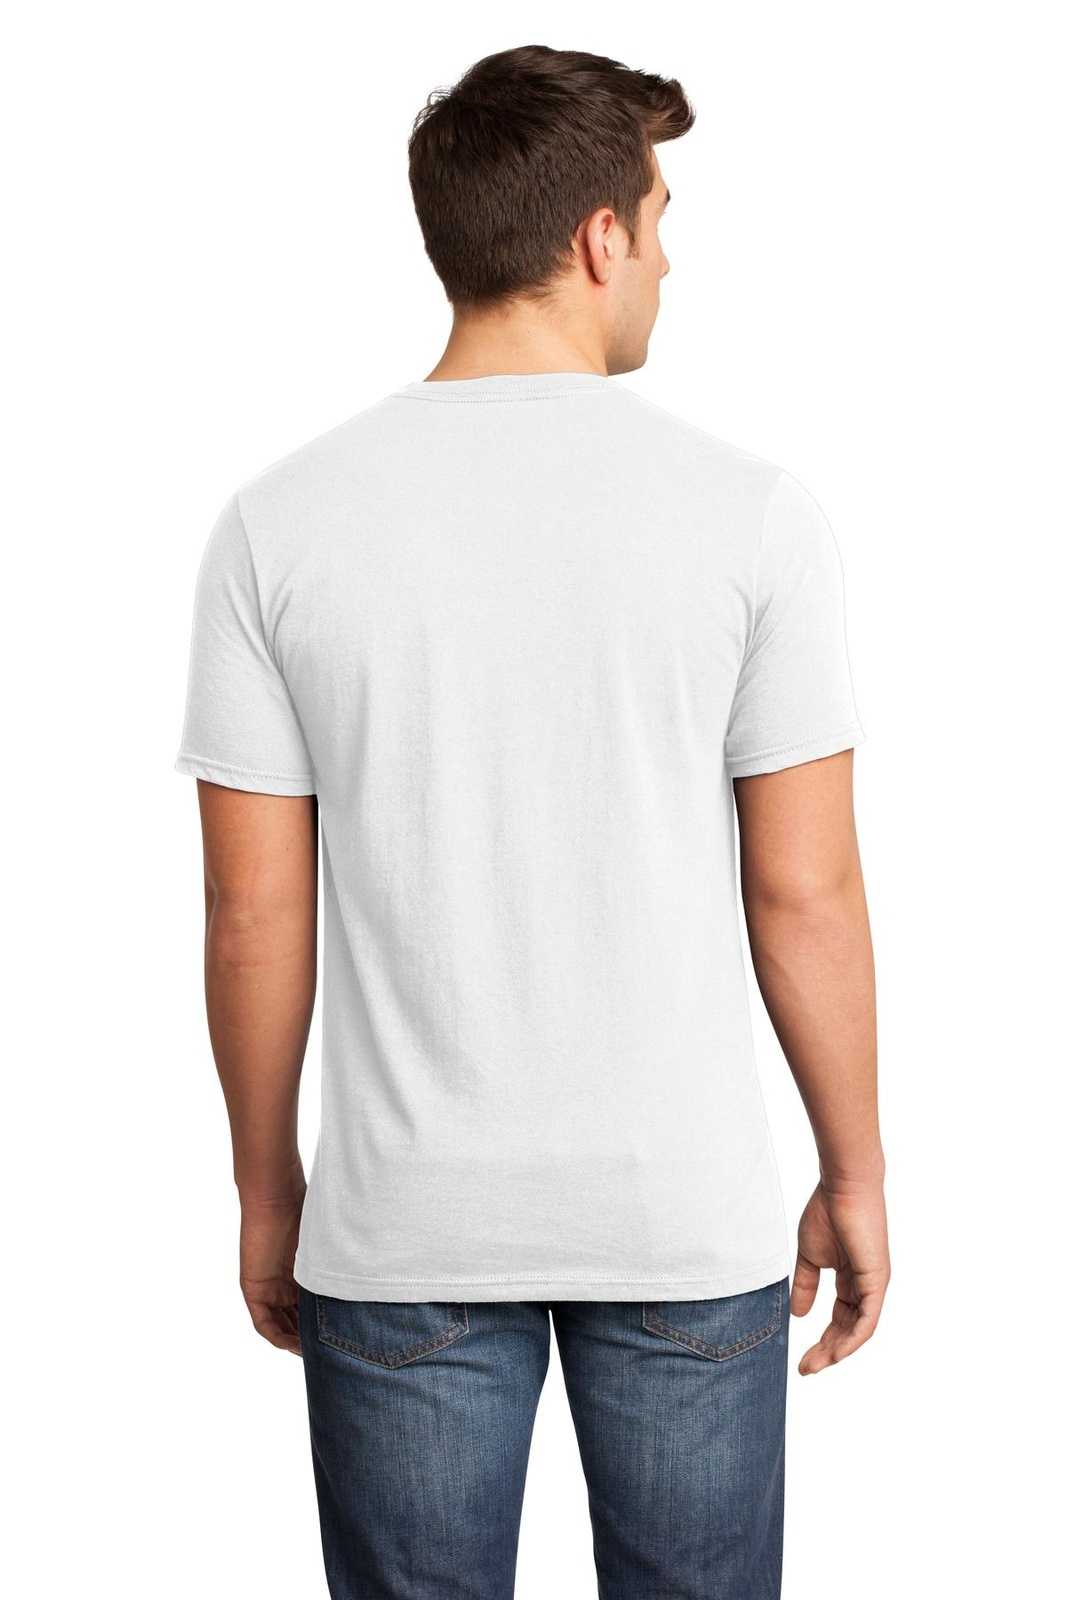 District DT6500 Very Important Tee V-Neck - White - HIT a Double - 1